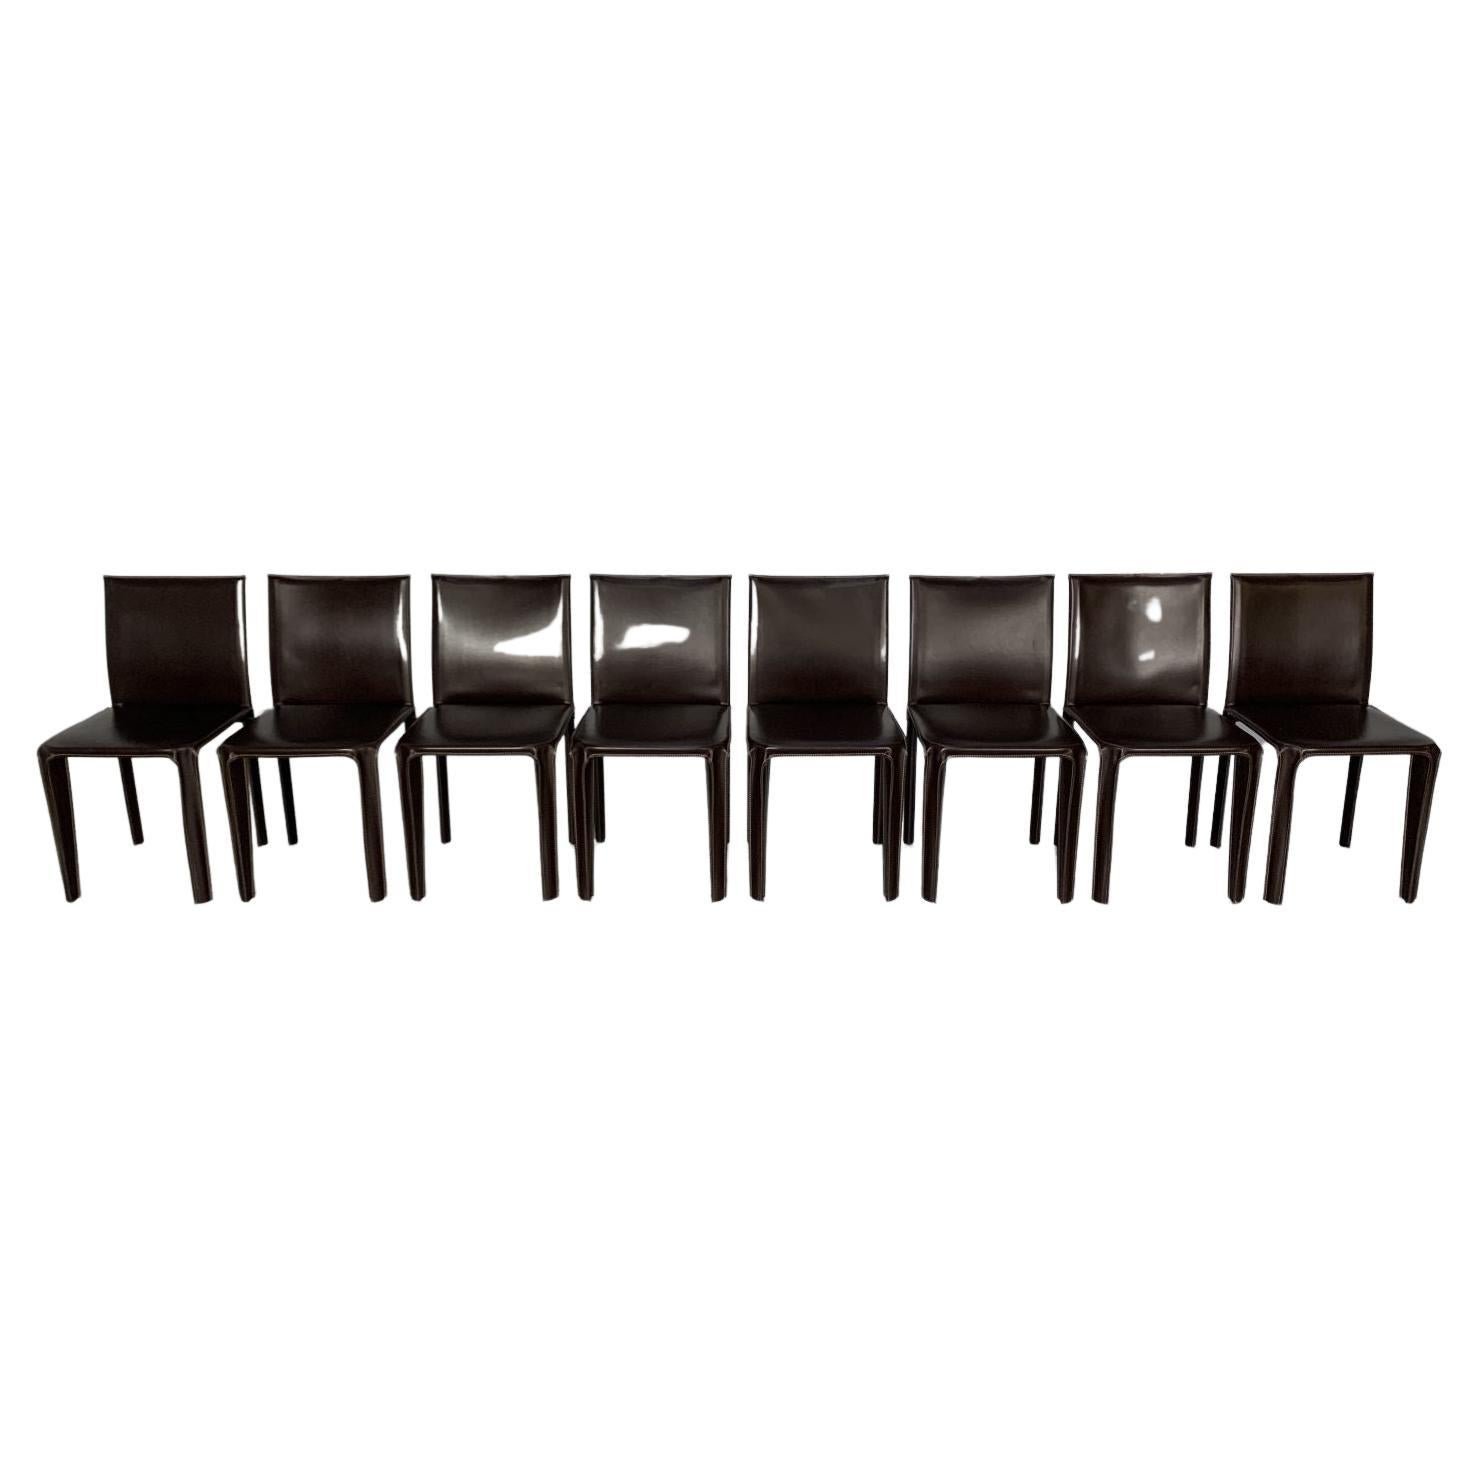 8 Arper Dining Chairs, in Brown Saddle Leather